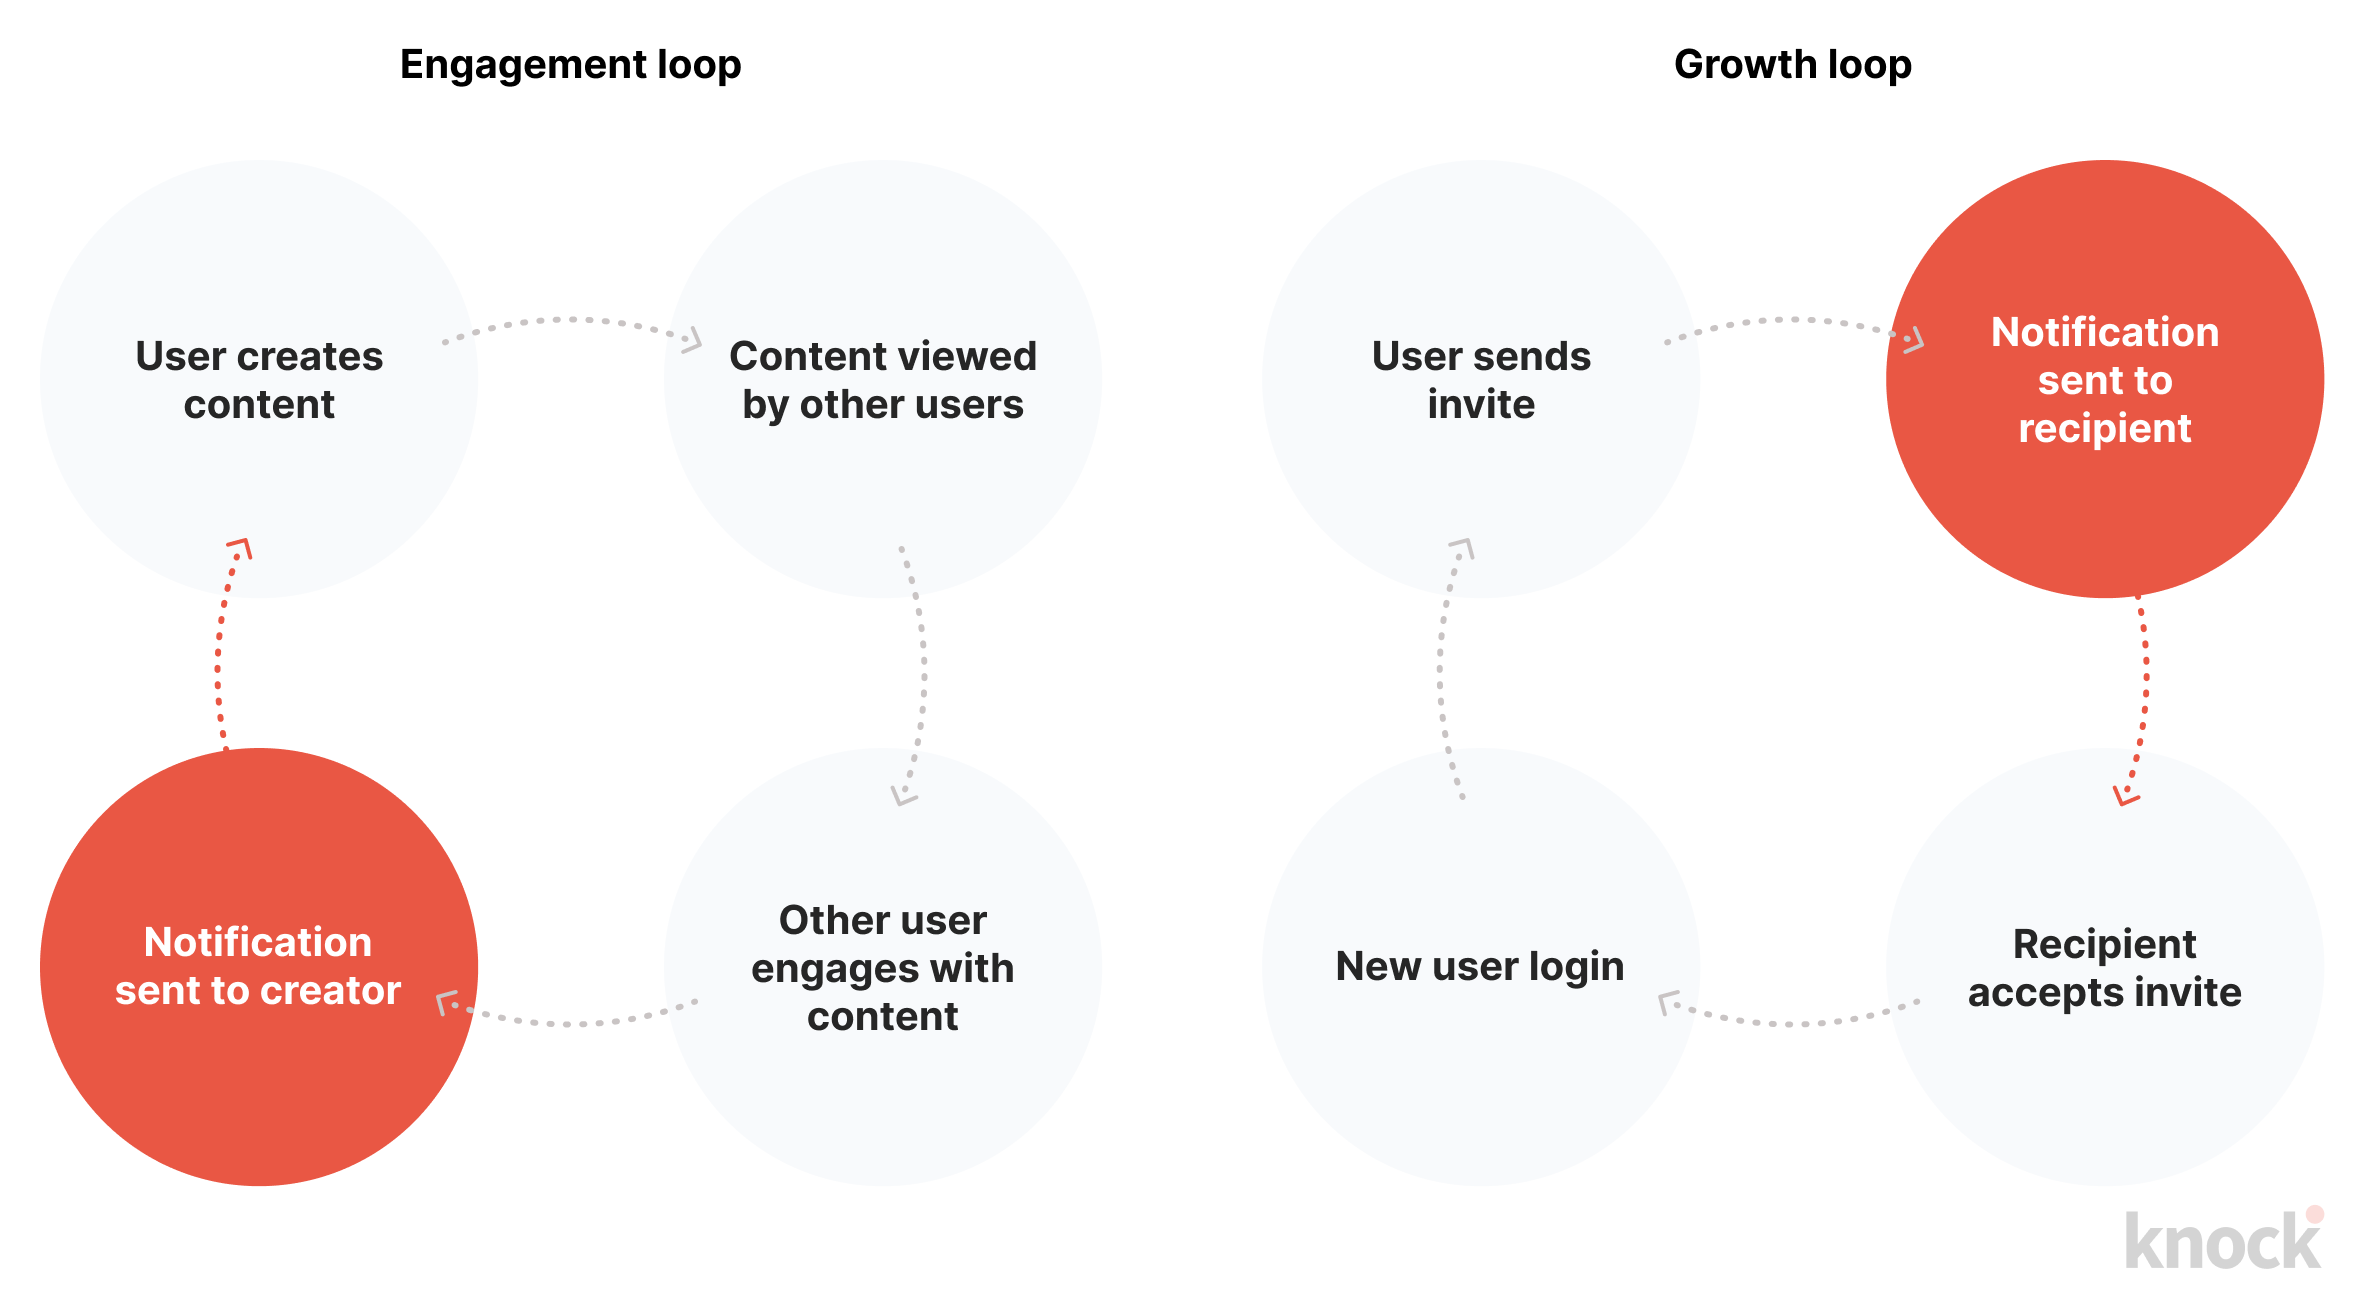 Two visual examples of growth and engagement loops and the role that notifications play in them.